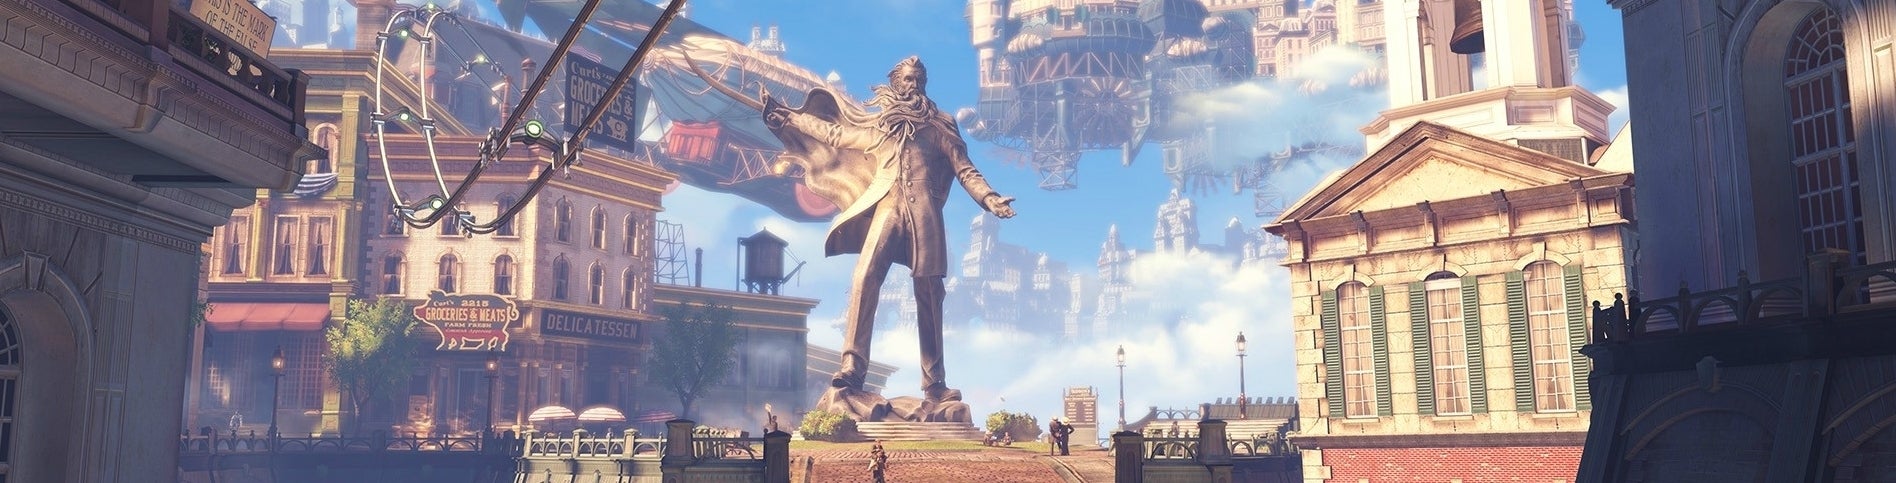 Image for BioShock Infinite review